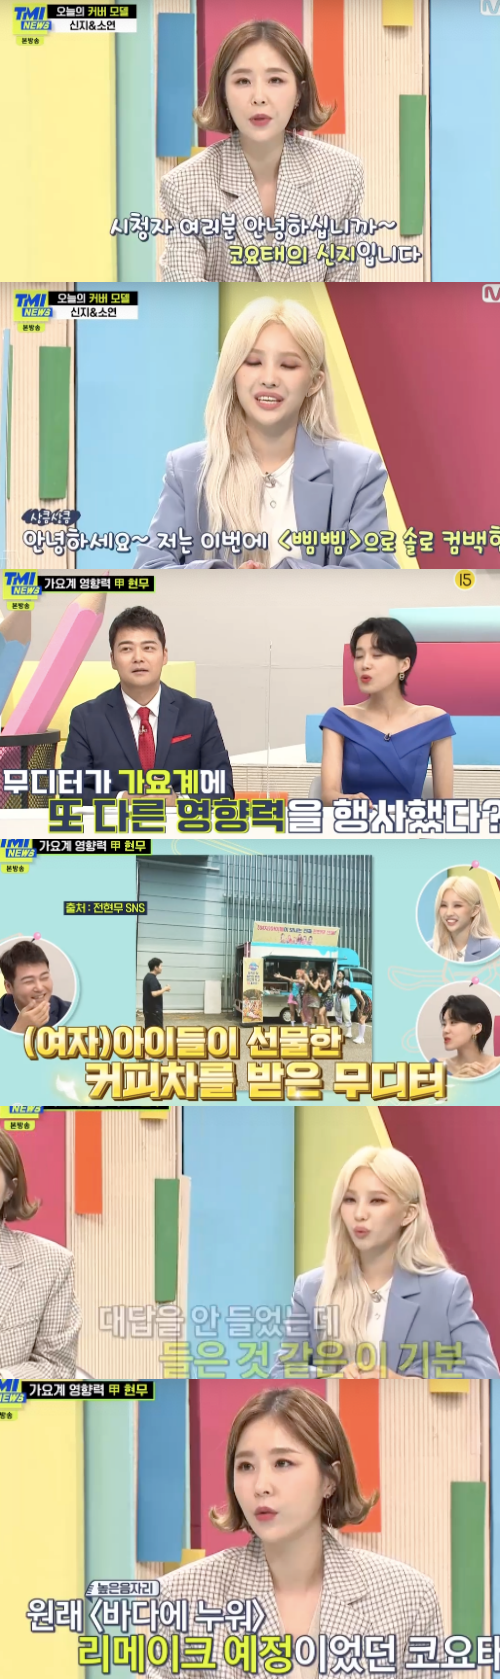 Shin Ji has attracted attention by saying that he has achieved sales of diet products of 500 won in TMI News.So-yeon of (girl) children appeared as a guest from Coyote Shin Ji on the M.net entertainment TMI News broadcast on the 4th.When asked about their TMI, Shin Ji said, I should have met Jun Hyun-moo someday. I tried to lie down in the past, but I asked him to remake the seabird.When Jun Hyun-moo was surprised, Shin Ji said, I would have blamed it if the reaction was not enough, but if it works, I will tell you a lot of good things.(Women) The children mention that the lyrics of Jun Hyun-moo gift Iran are heard in the song Dumded Dede, and Jun Hyun-moo presents Coffee tea.So-yeon said, I think something is kinder.So-yeon said, I produced the album with Iran song, I produced it all. All of them asked, I will be comfortable with genius, copyright fee. So-yeon asked, Dumdeddy started to react again and became a summer season song.Shin Ji also said, It was the first time that I had a double eyelid surgery contests among female entertainers on the air, and it was a negative time for plastic surgery. I told the company to lie, but since then I have talked a lot about alcohol and living.When asked about the most memorable express treatment, he recalled, When I was in the first place at the BOA and M headquarters, I had to go to public broadcasting from Chuncheon to Yeouido. M headquarters floated the BOA and us helicopters.Above all, Shin Ji attracted attention by saying that it achieved sales of 50 billion won for the first time as a single diet product.When asked about the diet secret, Shin Ji added, I do not eat food three hours before I have to eat late at night, and I do not eat food after 7 oclock.Capture the TV screen of TMI News